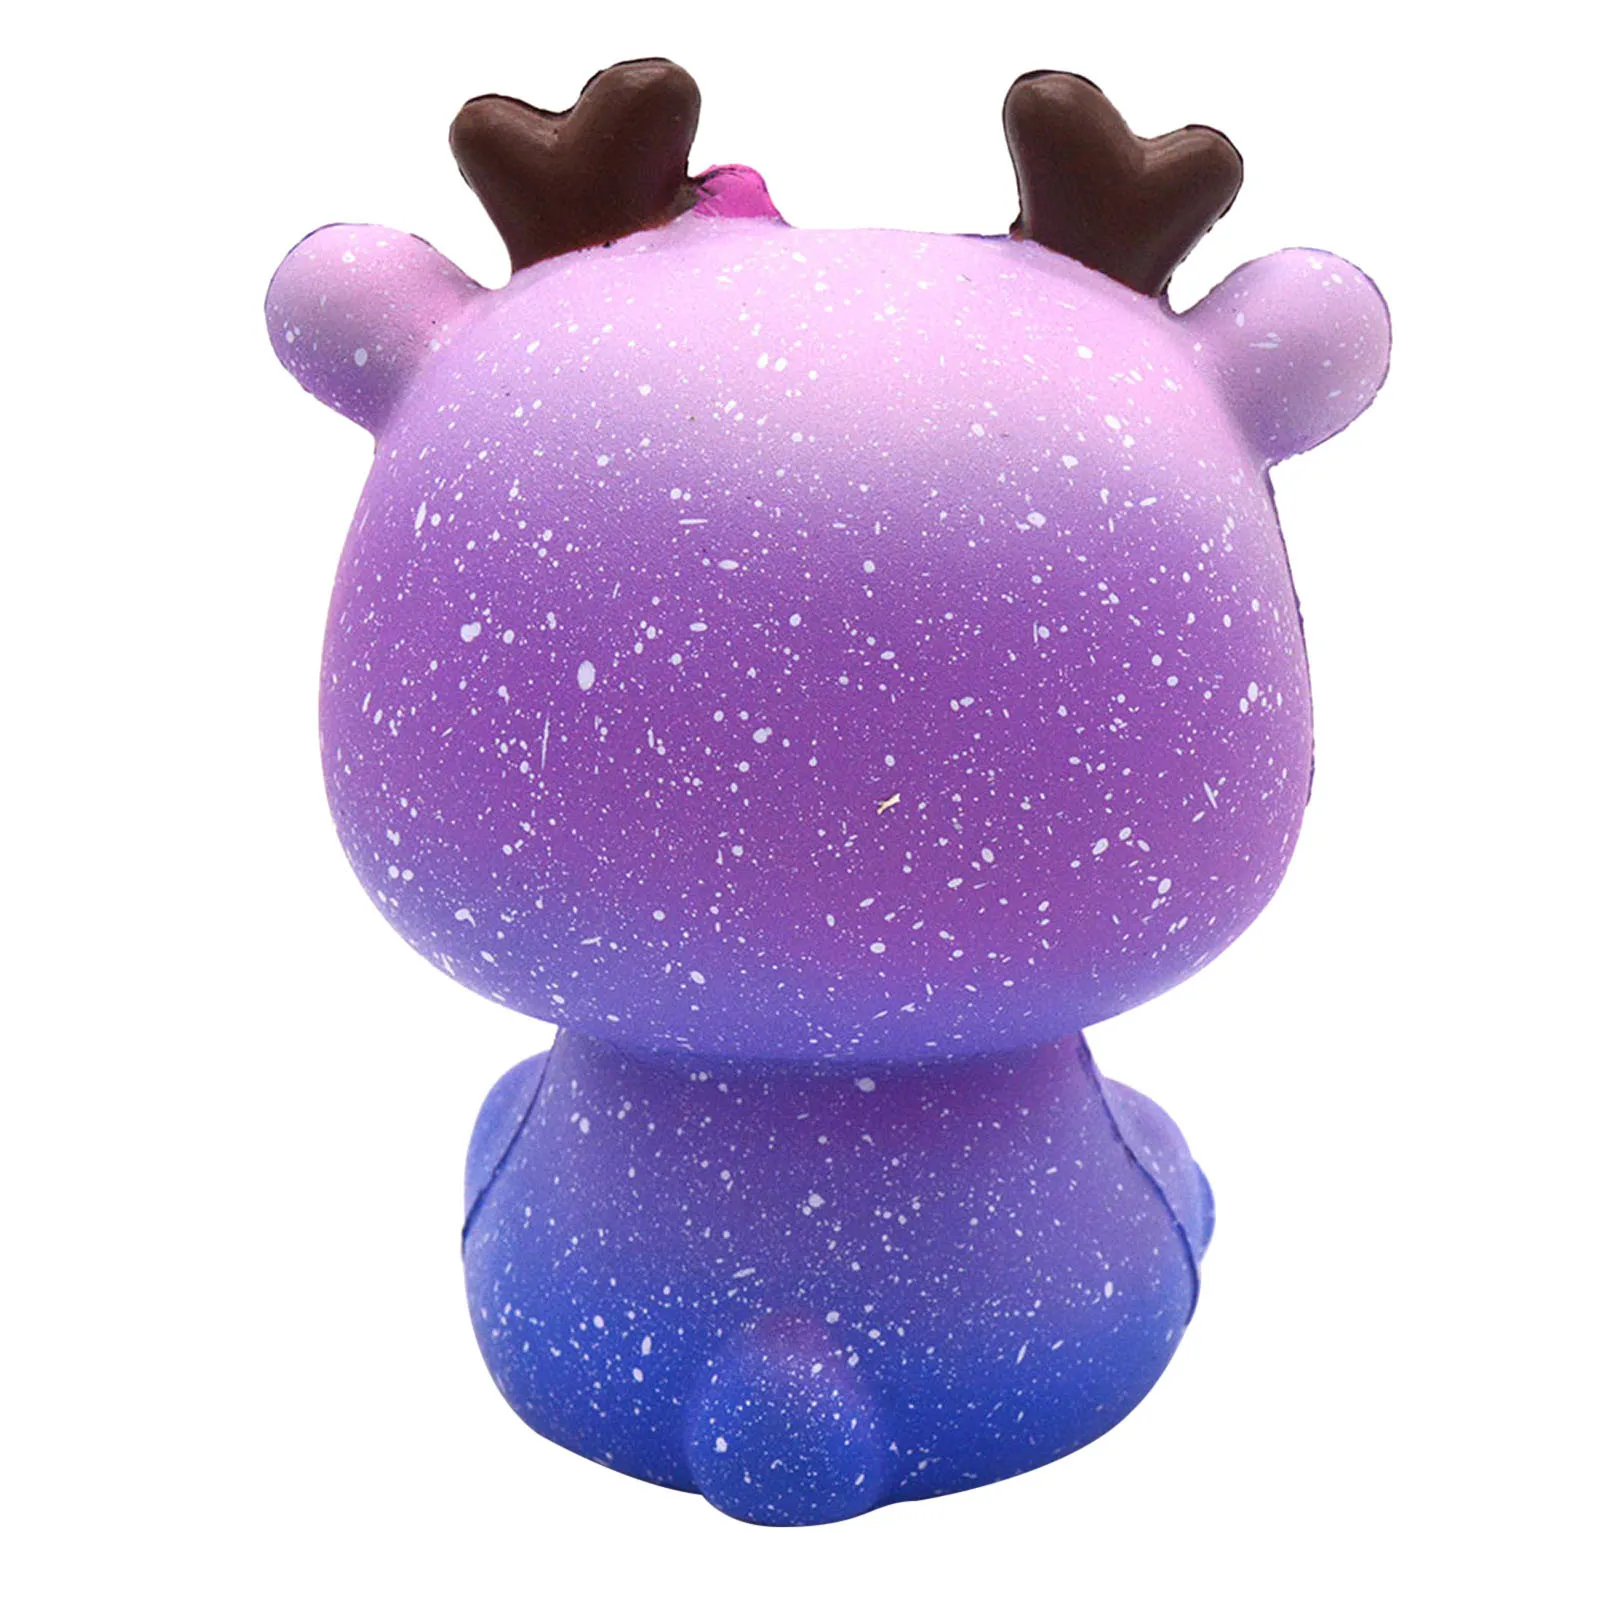 

Xmas Kawaii Cartoon Galaxy Deer Slow Rising Cream Scented Stress Reliever Toys Relief Squeeze Toys Antistress Ball Juguetes Toy